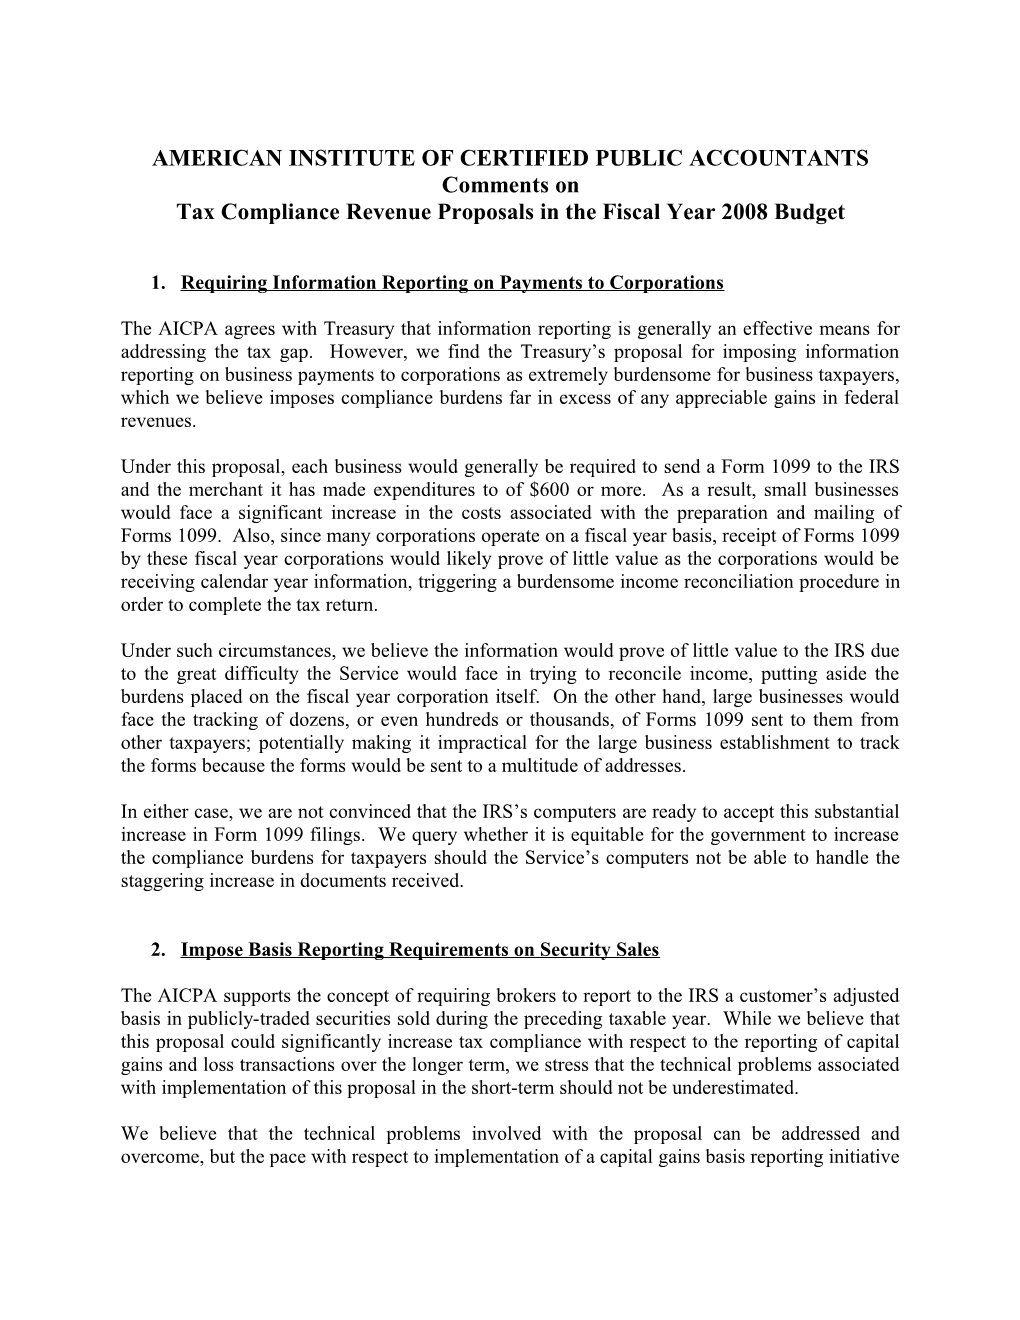 AICPA Comments on Fiscal 2008 Tax Compliance Revenue Proposals